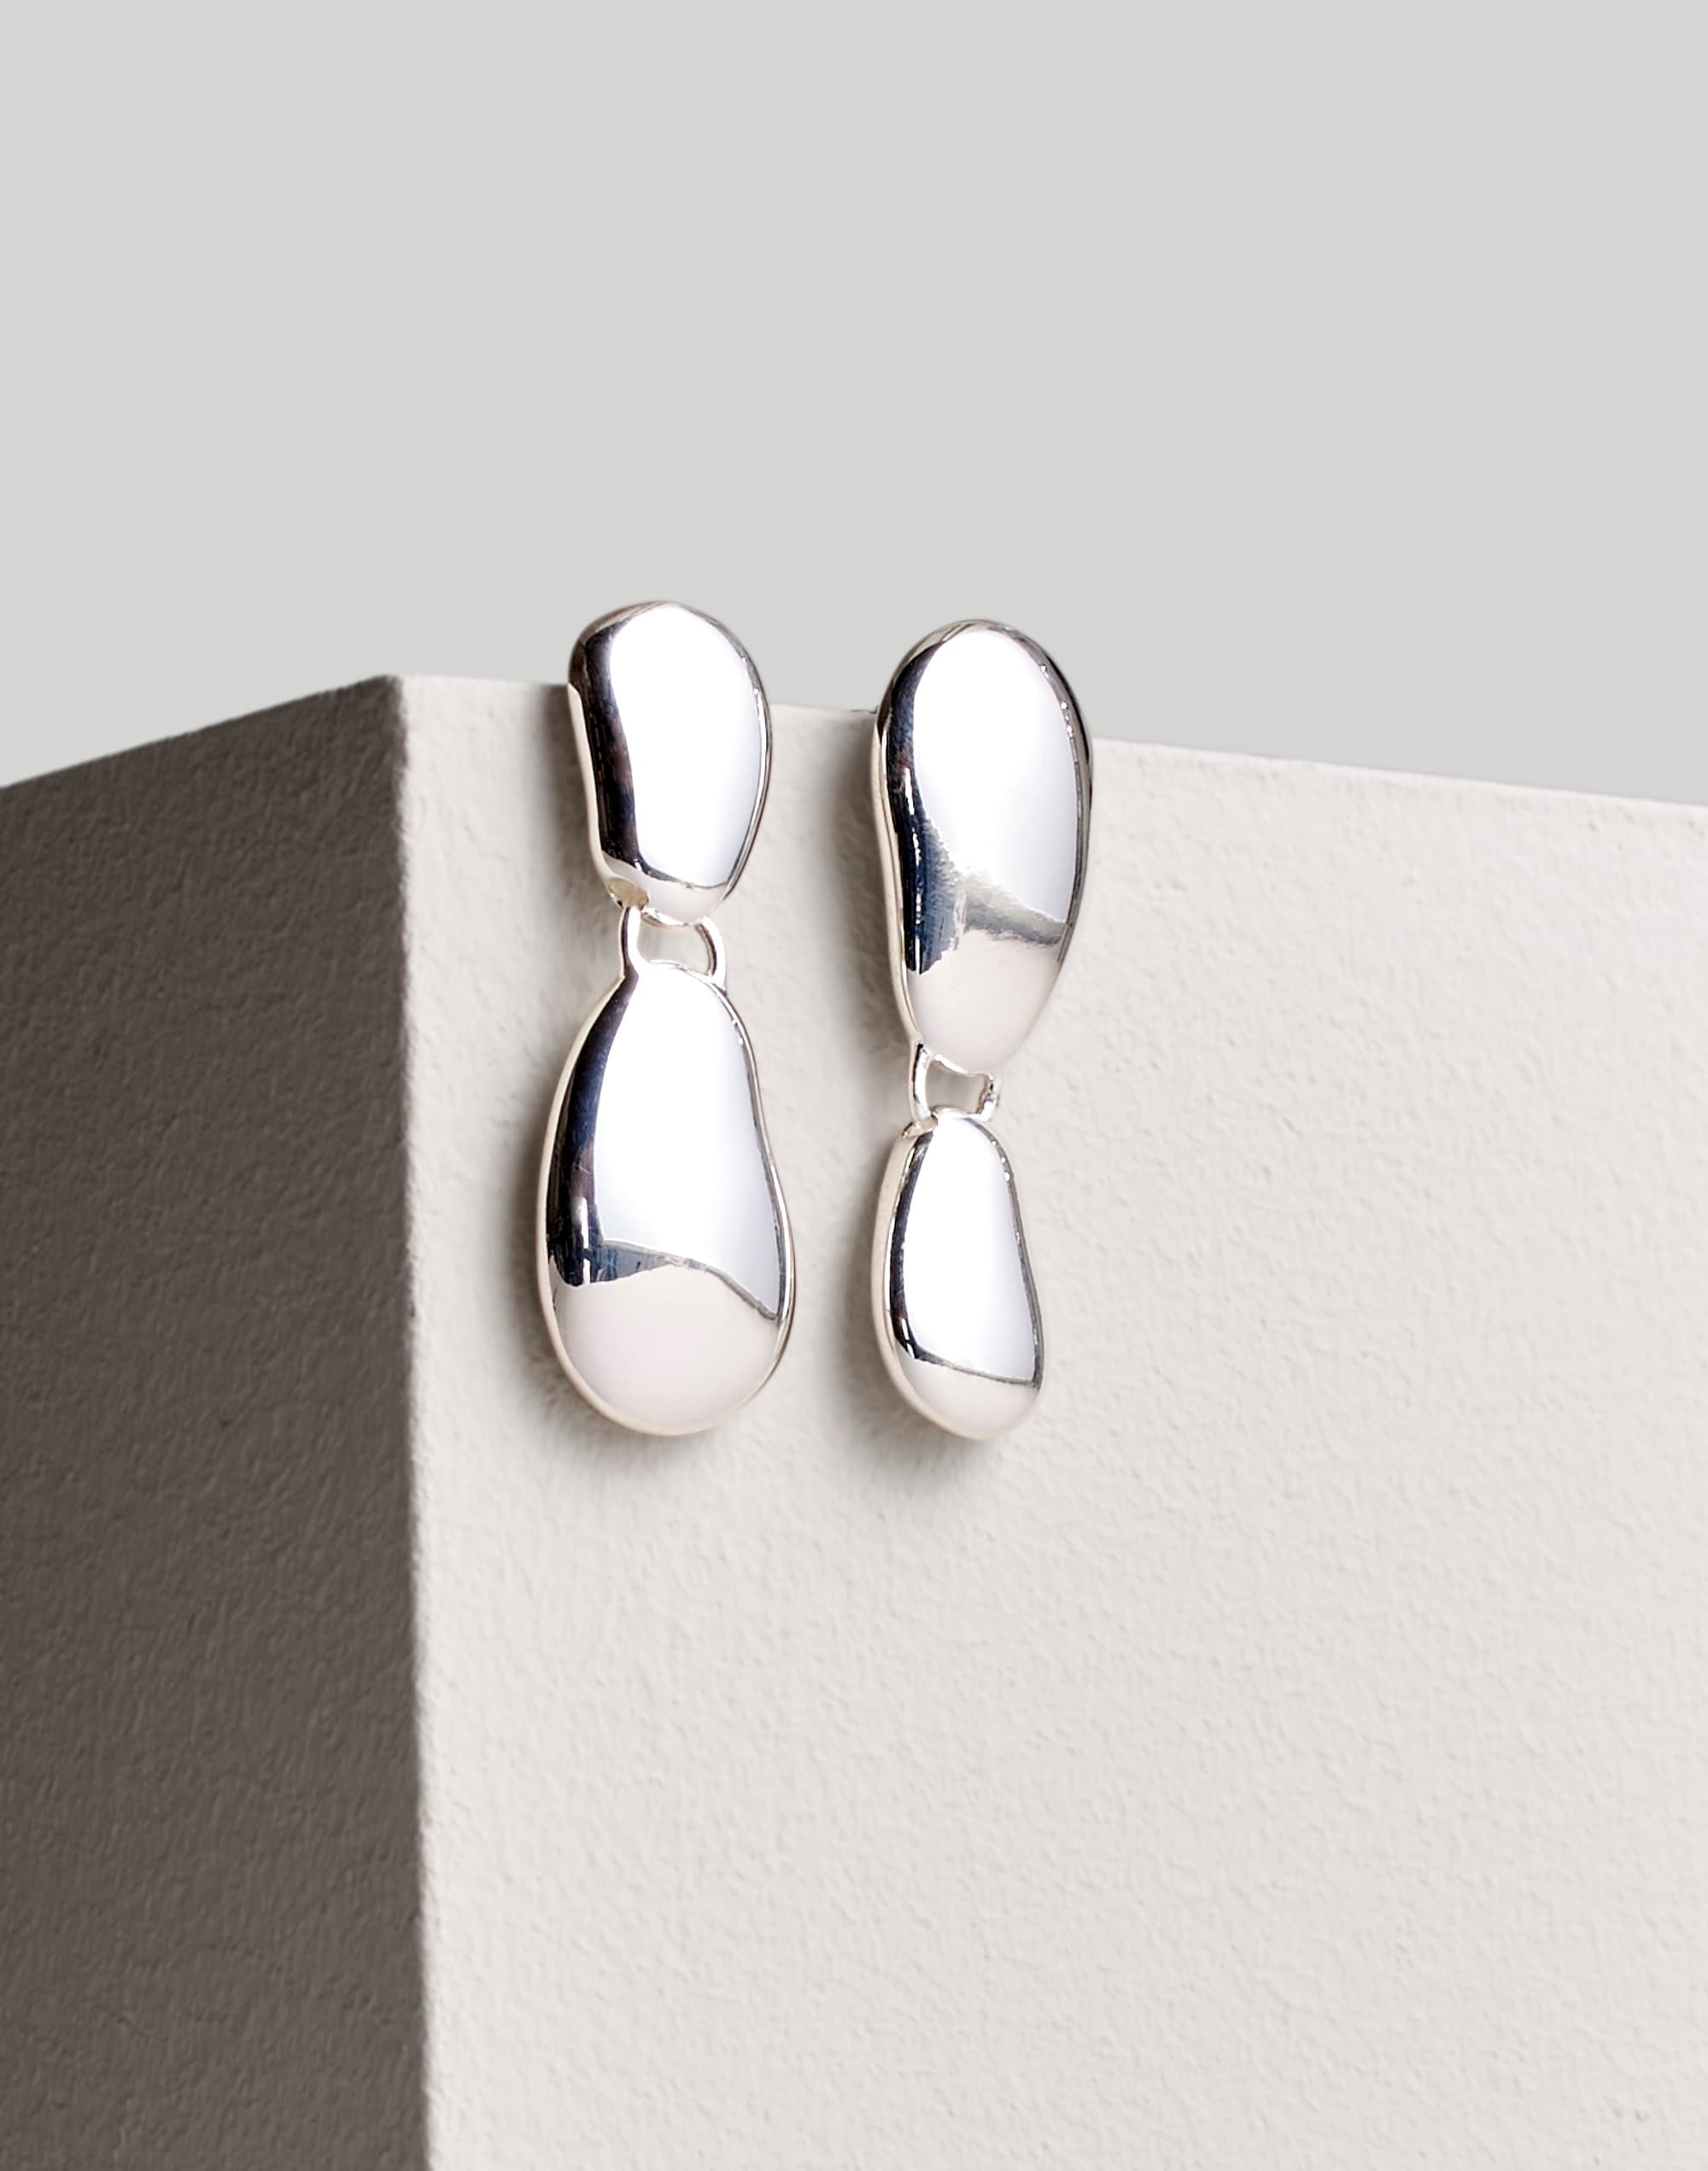 Mw The Sterling Silver Collection Statement Drop Earrings